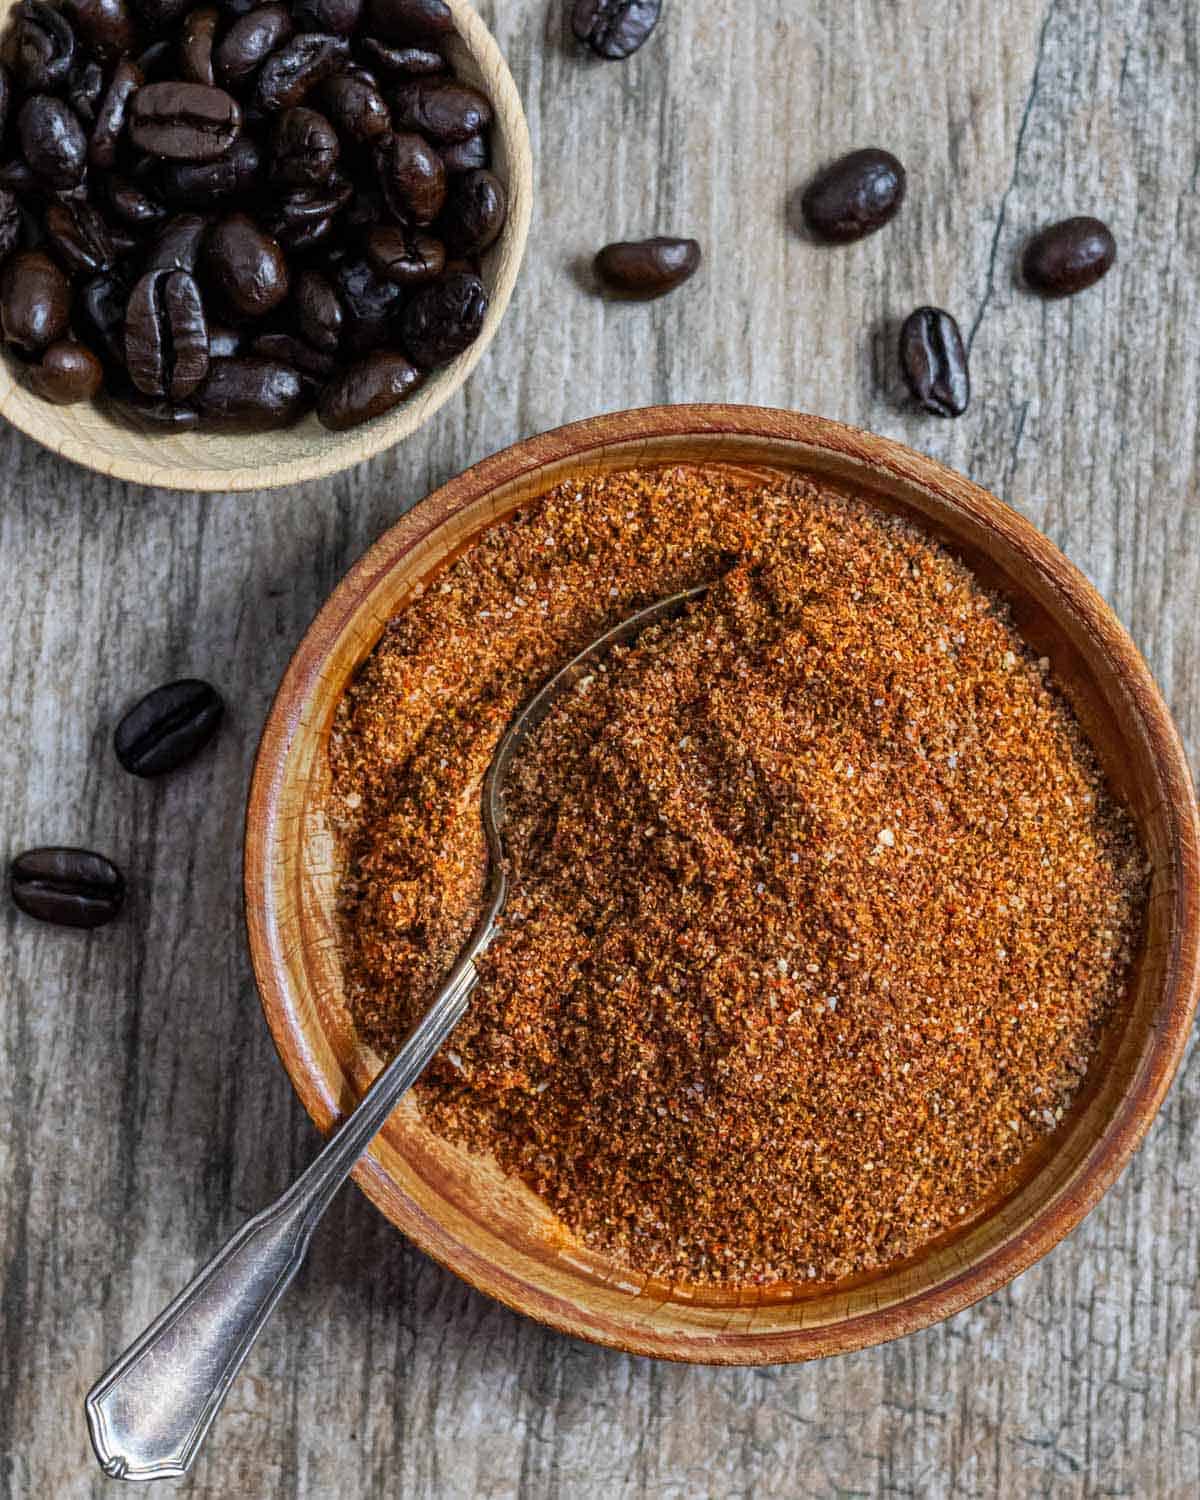 Coffee rub in small wood bowl with a spoon in it next to a small bowl of whole coffee beans.